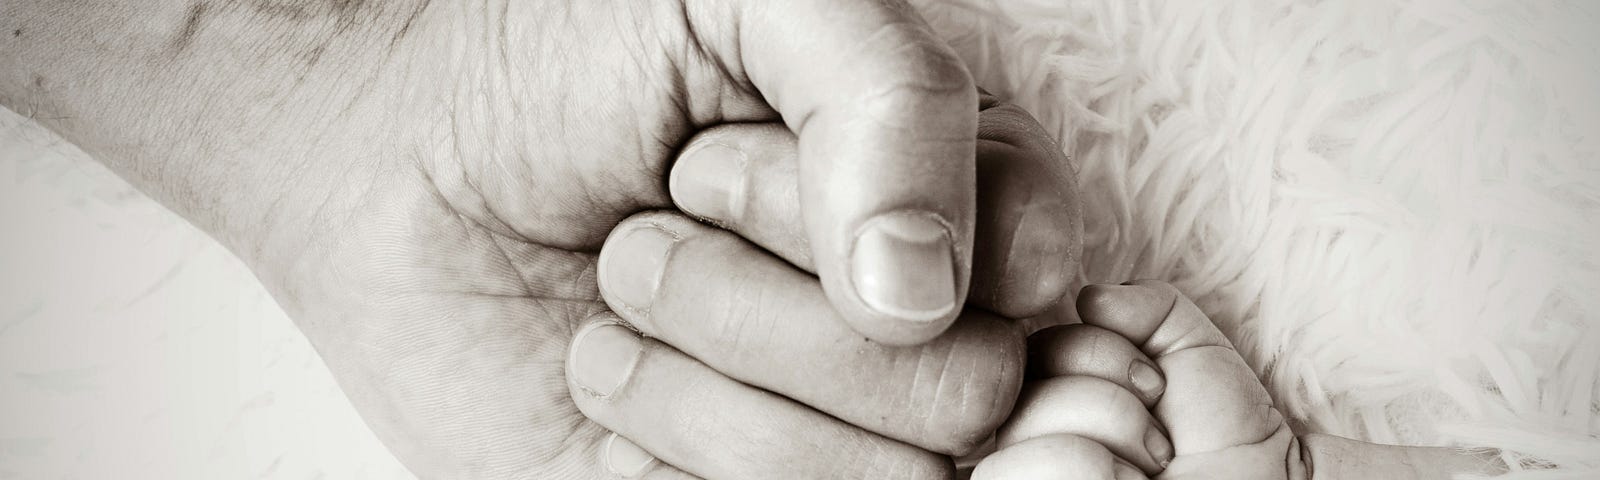 A grown-up hand bumps a small child’s hand